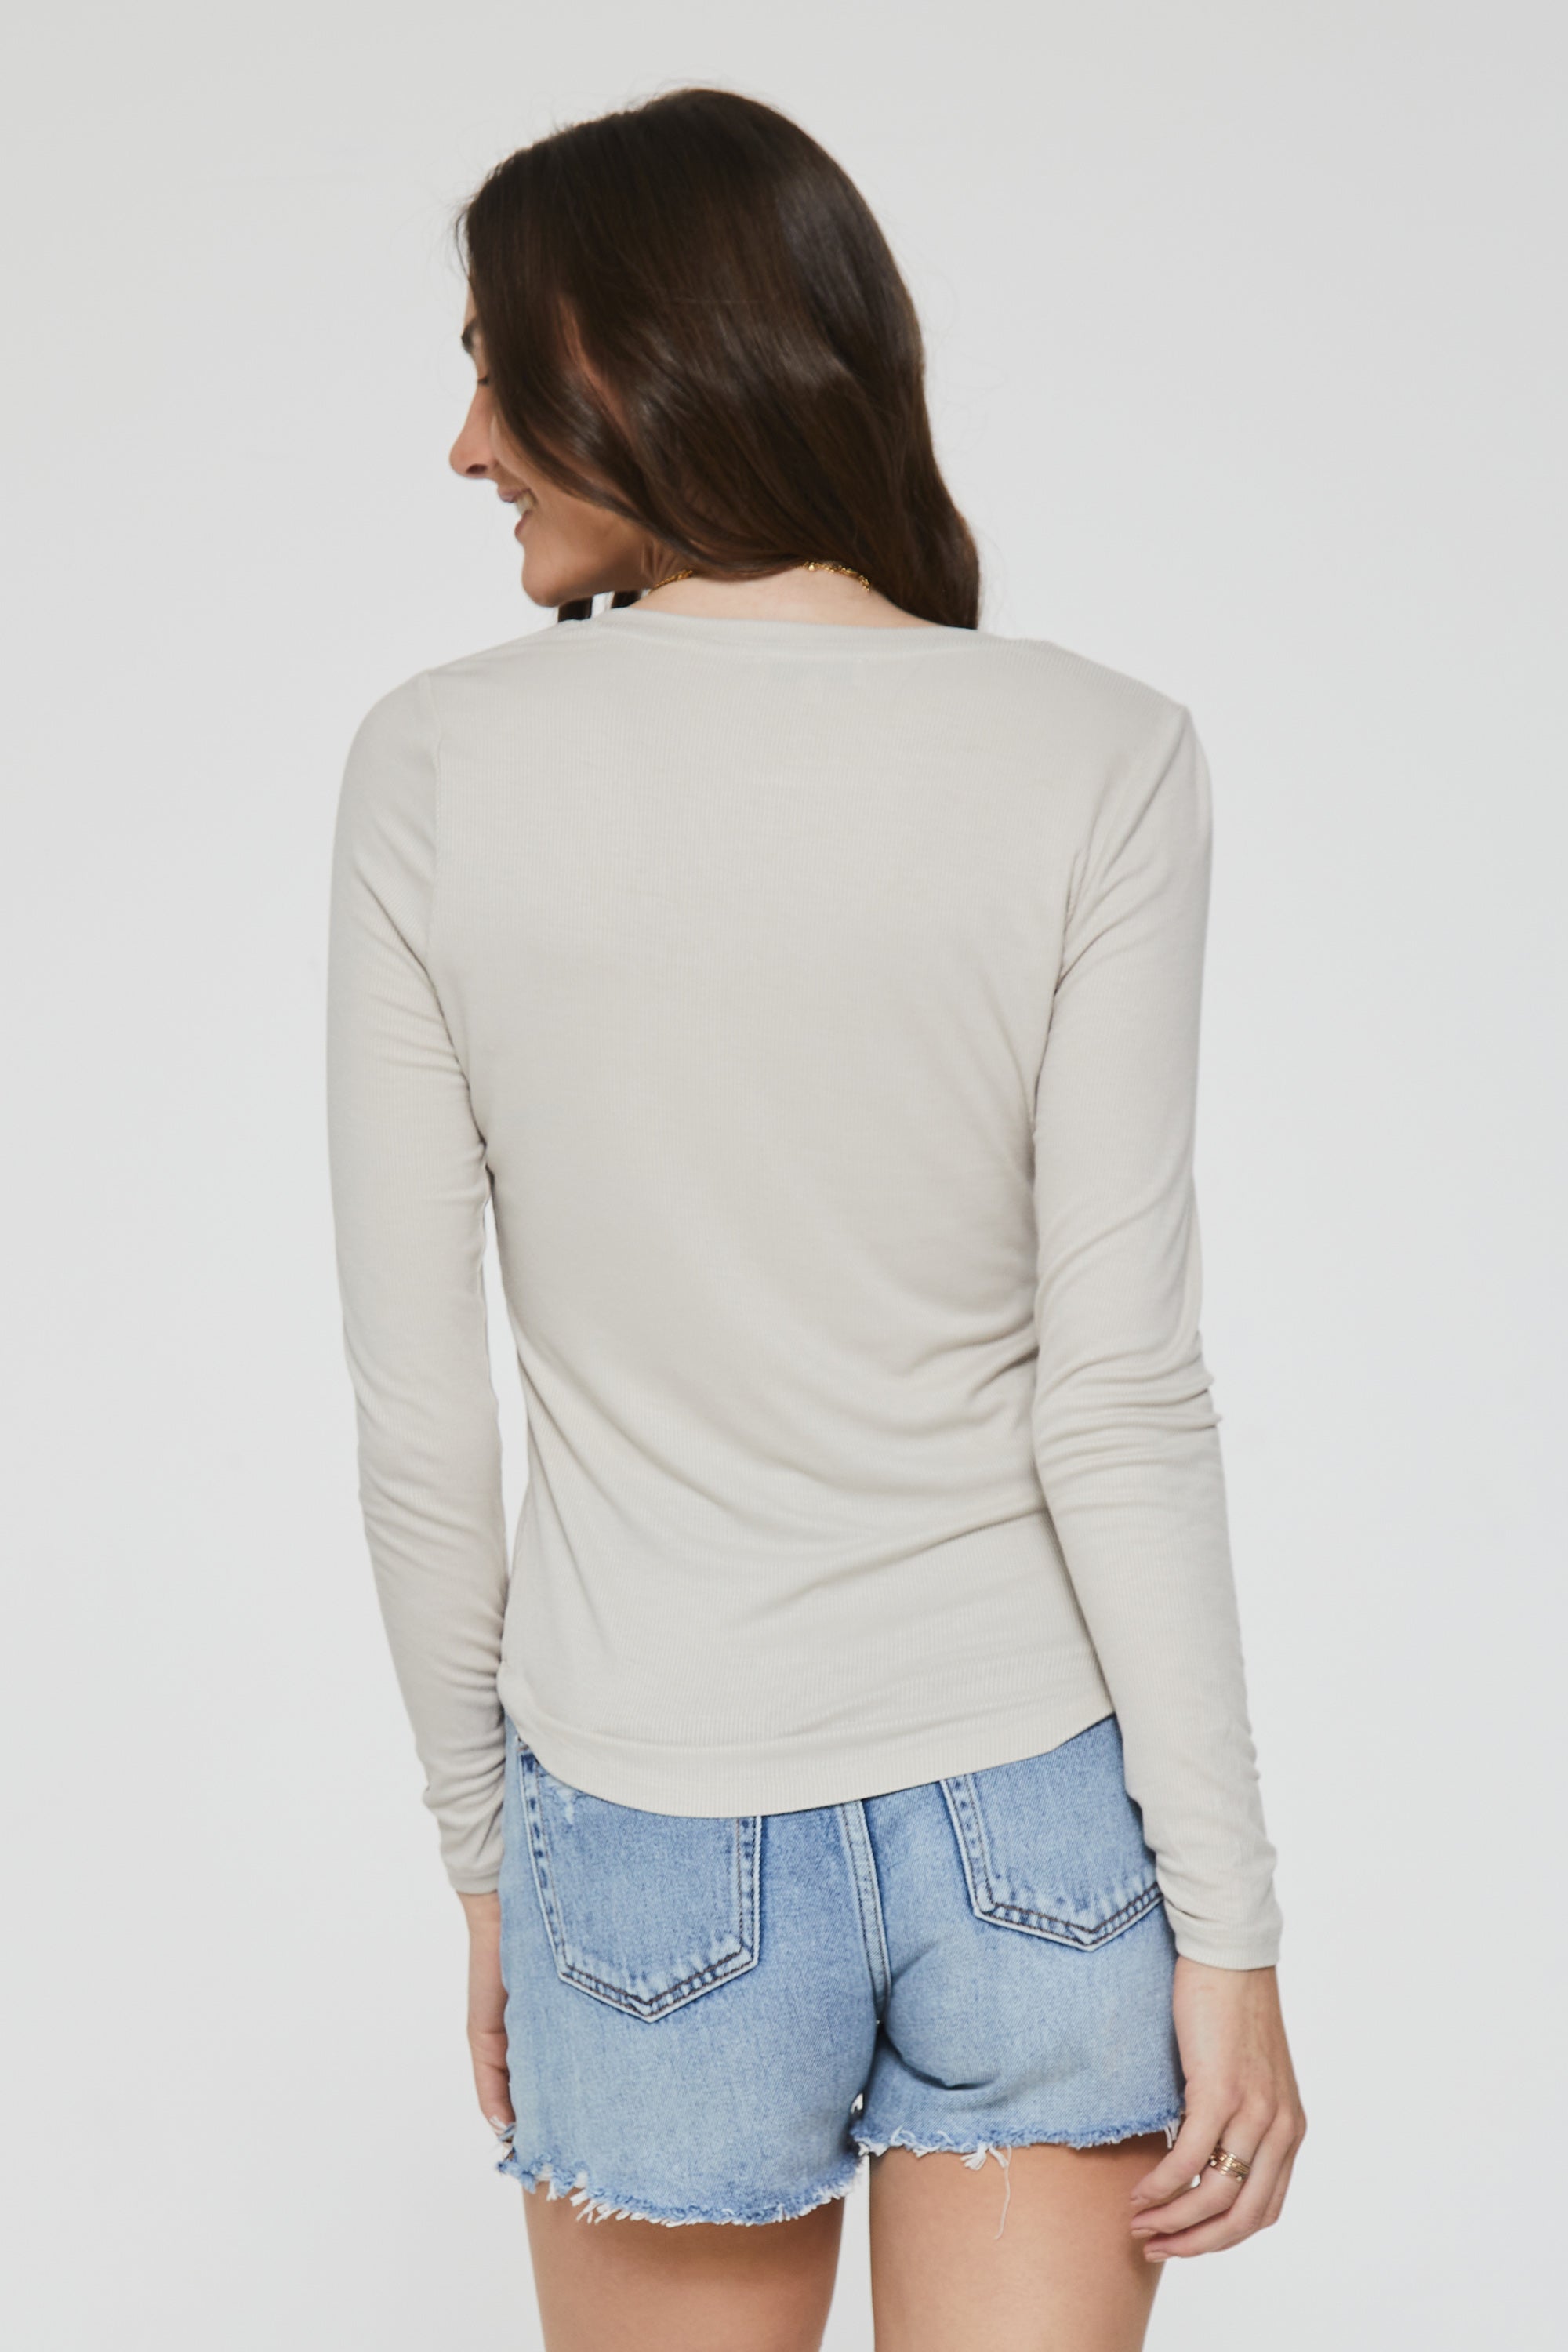 sophie-long-sleeve-tee-oyster-back-image-another-love-clothing